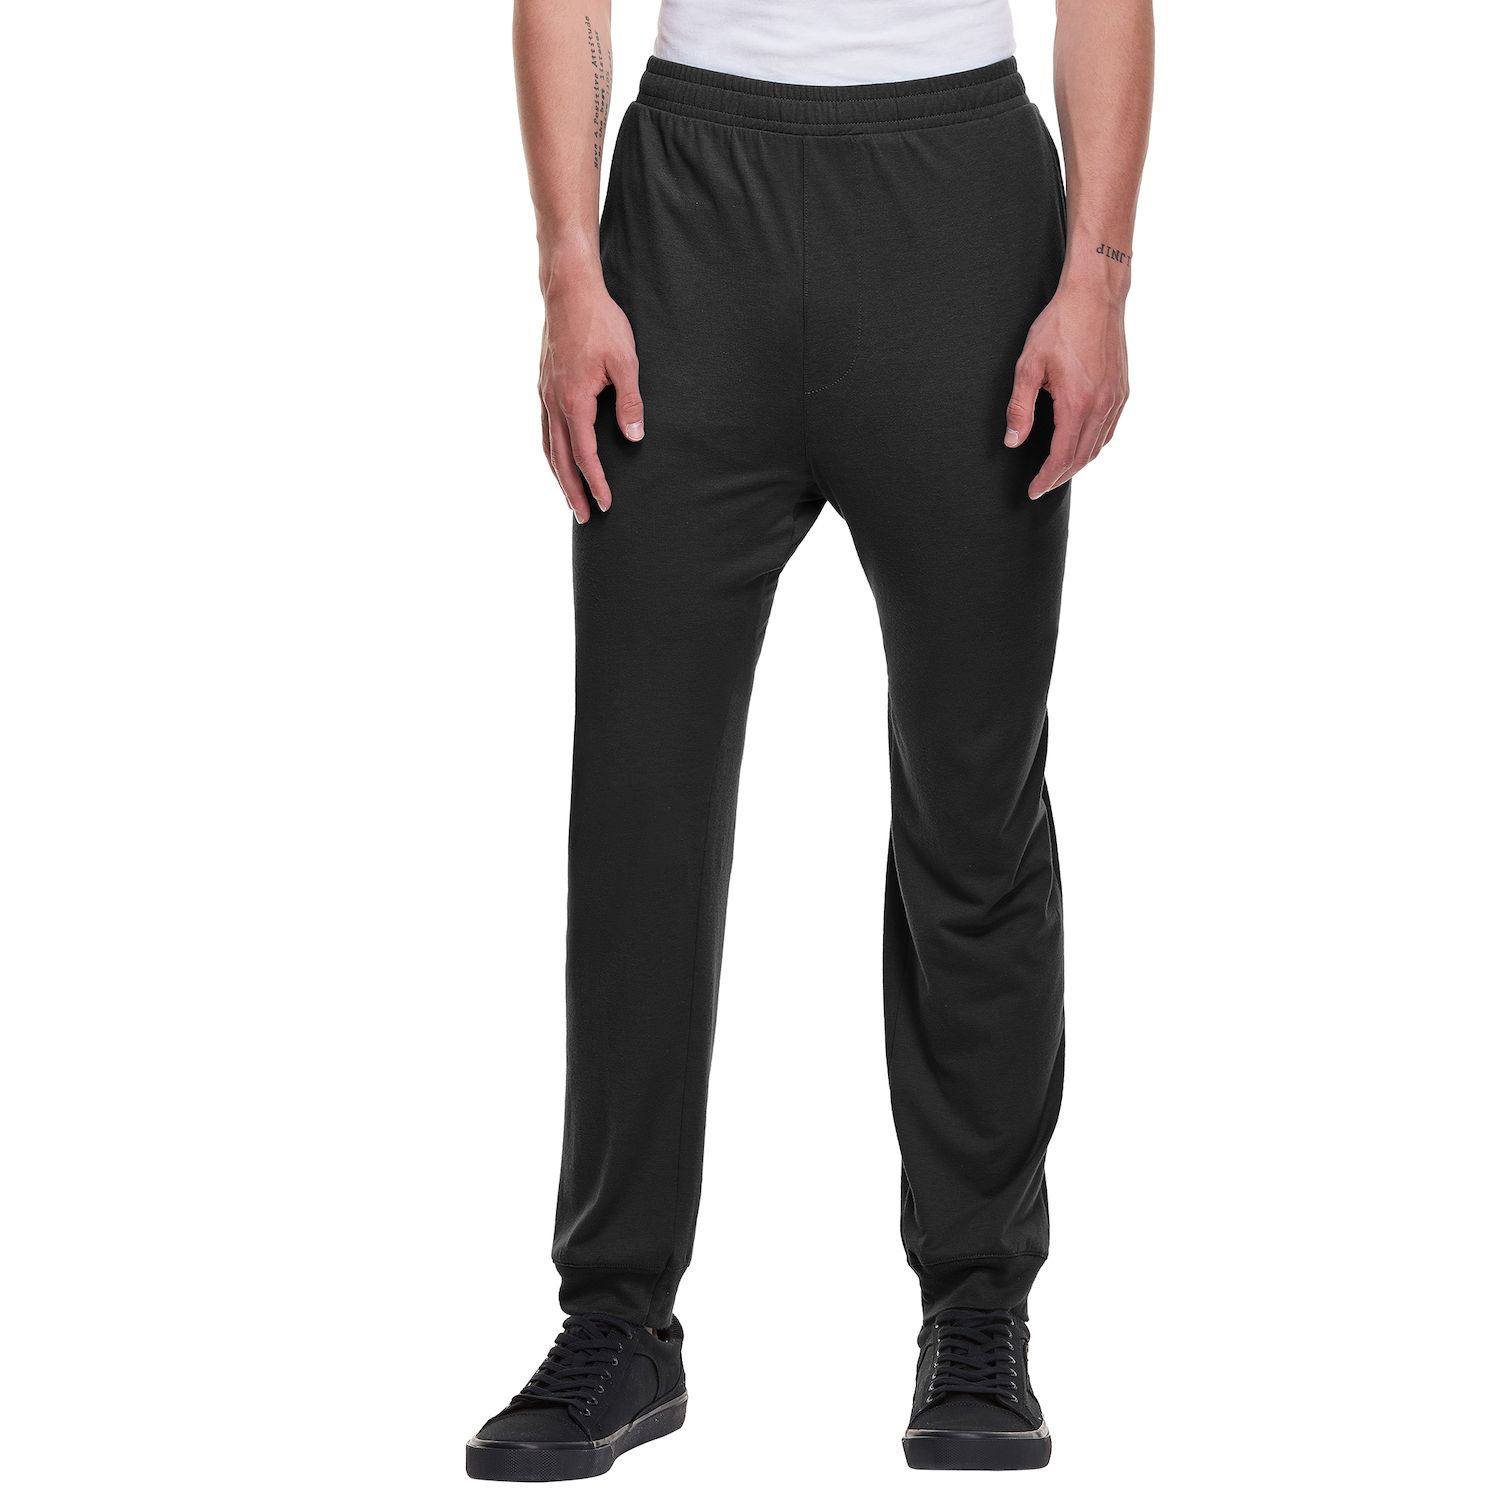 Image for Hanes Men's Lightweight Tri-Blend Jersey Joggers at Kohl's.